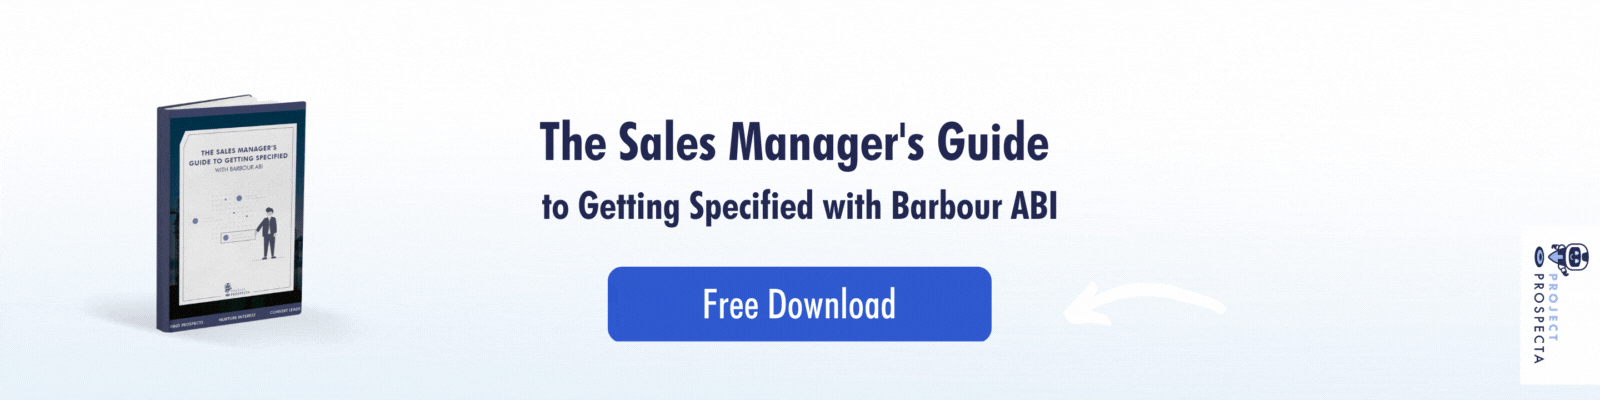 Download-The-Sales-Managers-Guide-To-Barbour-ABI